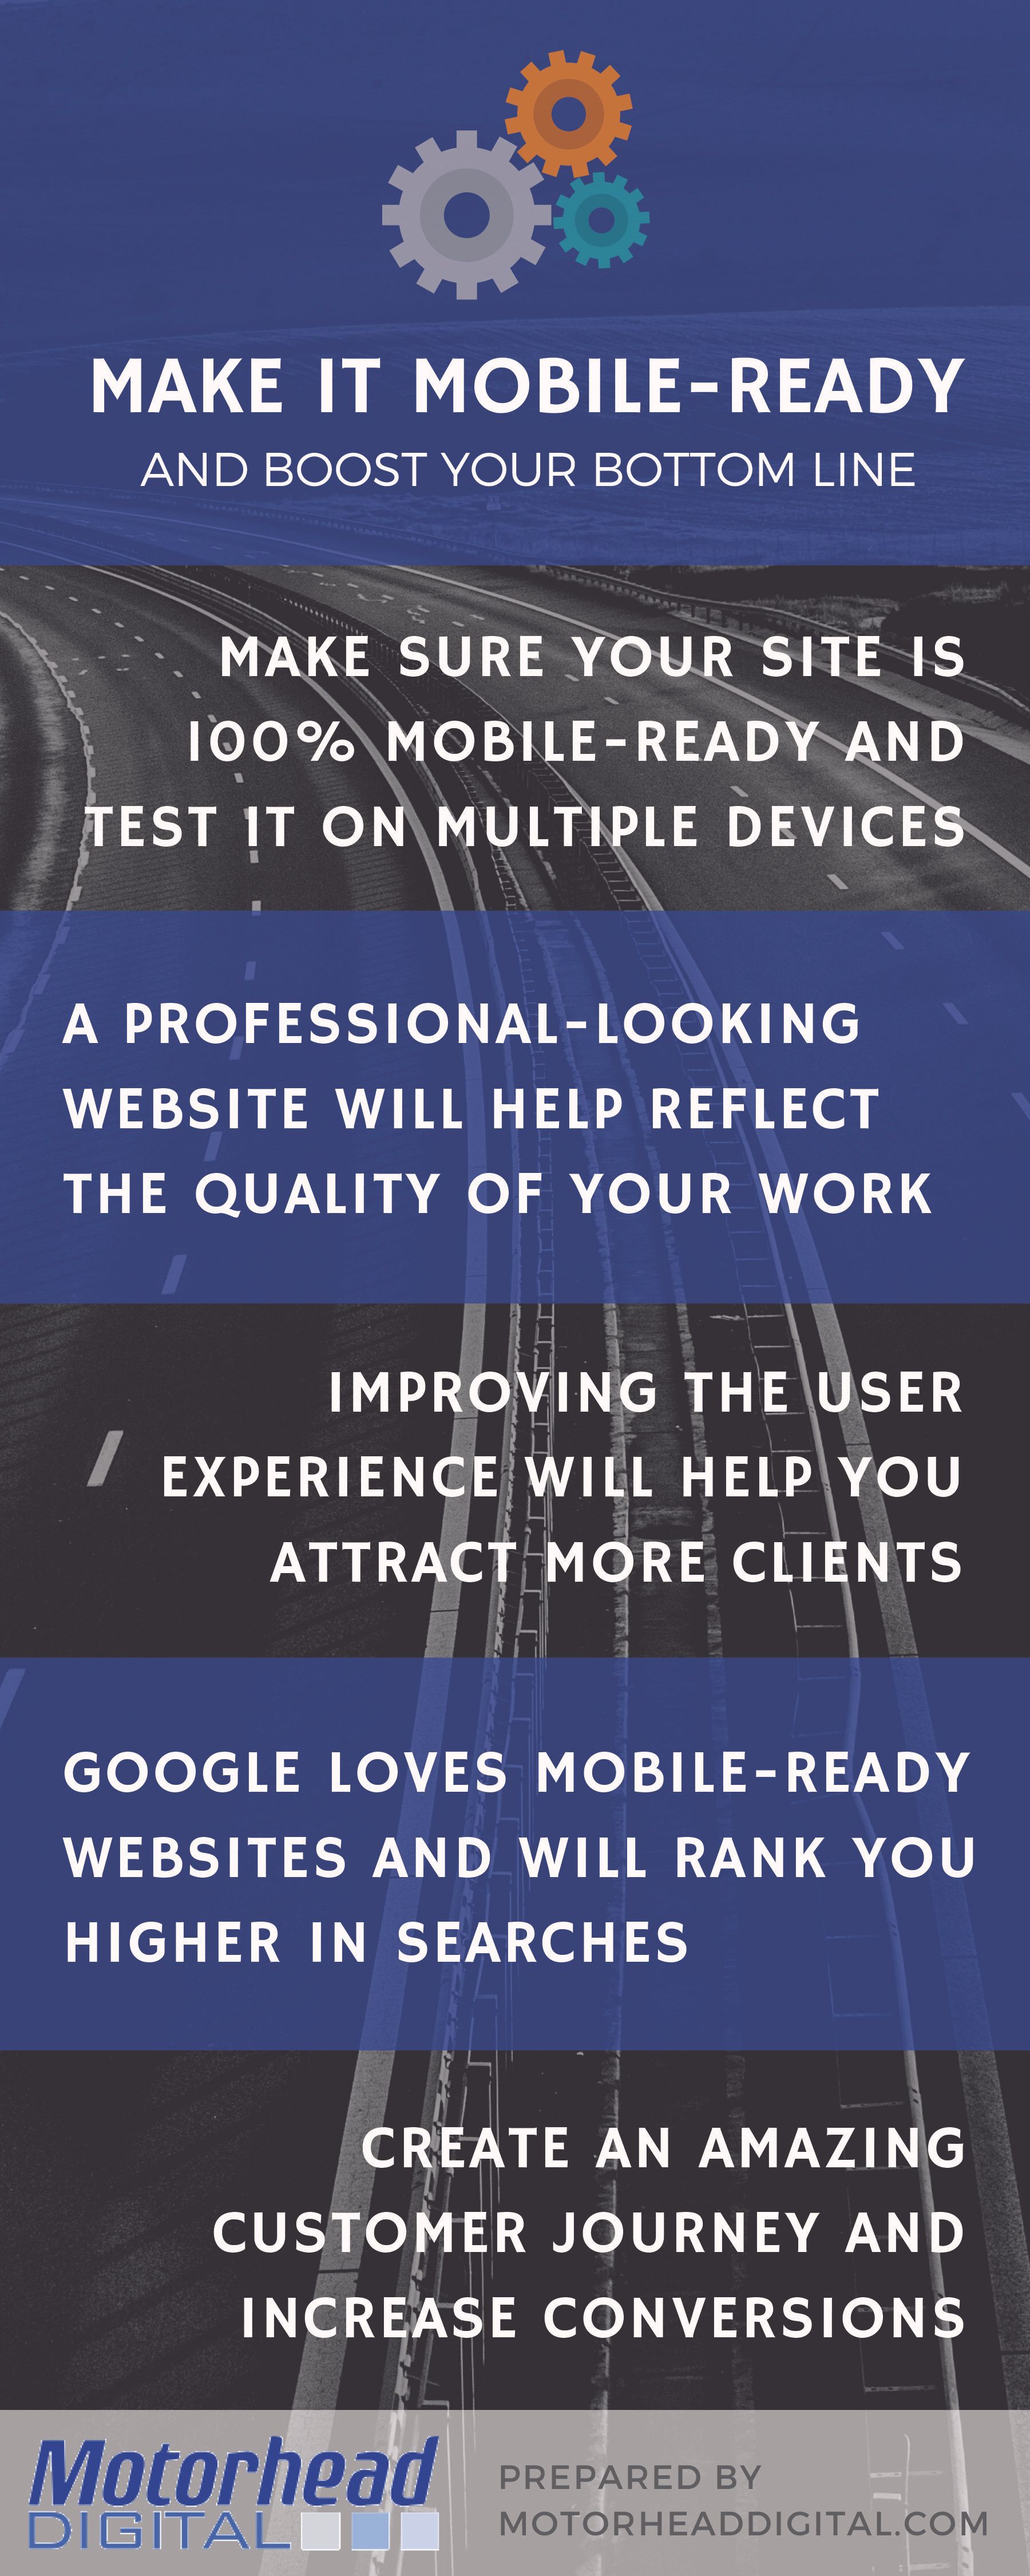 infographic with tips on optimizing your website to be mobile ready